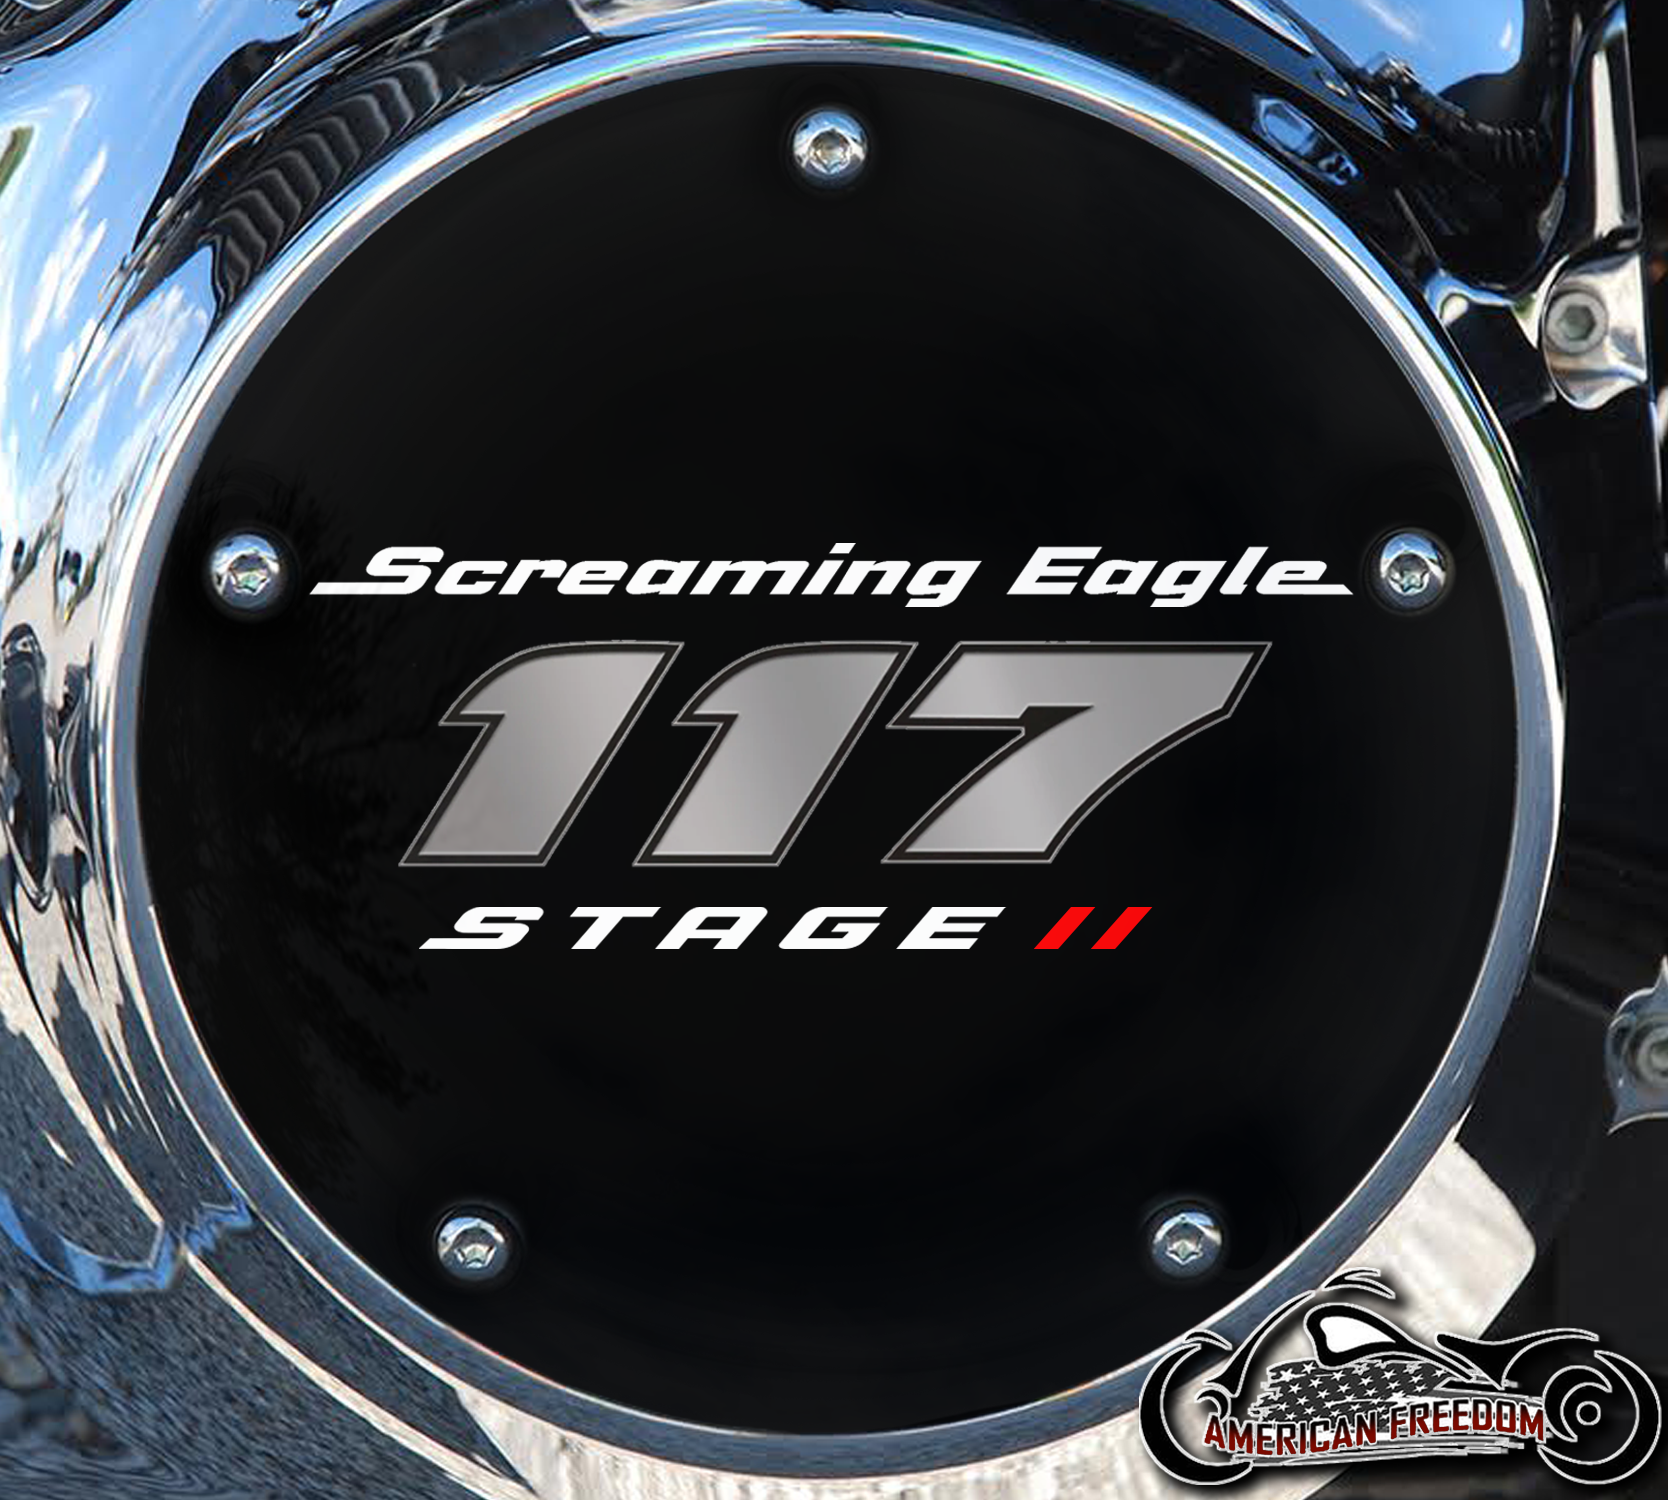 Screaming Eagle Stage II 117 Derby Cover